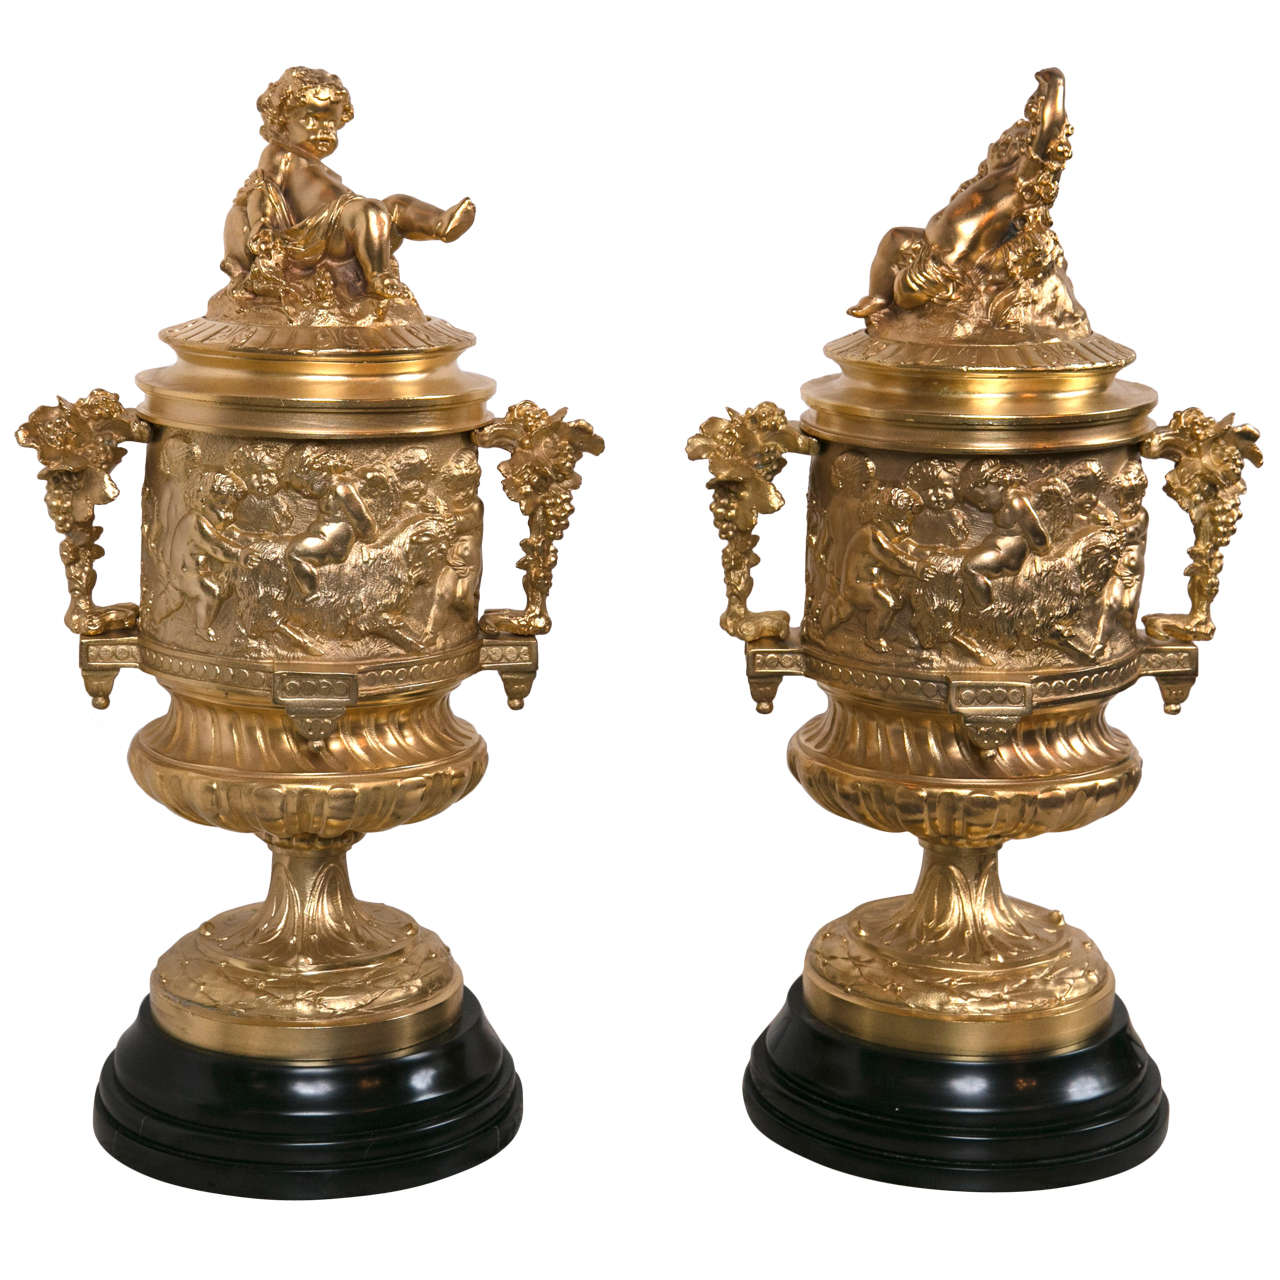 Pair of Gilt Bronze Covered Urns For Sale